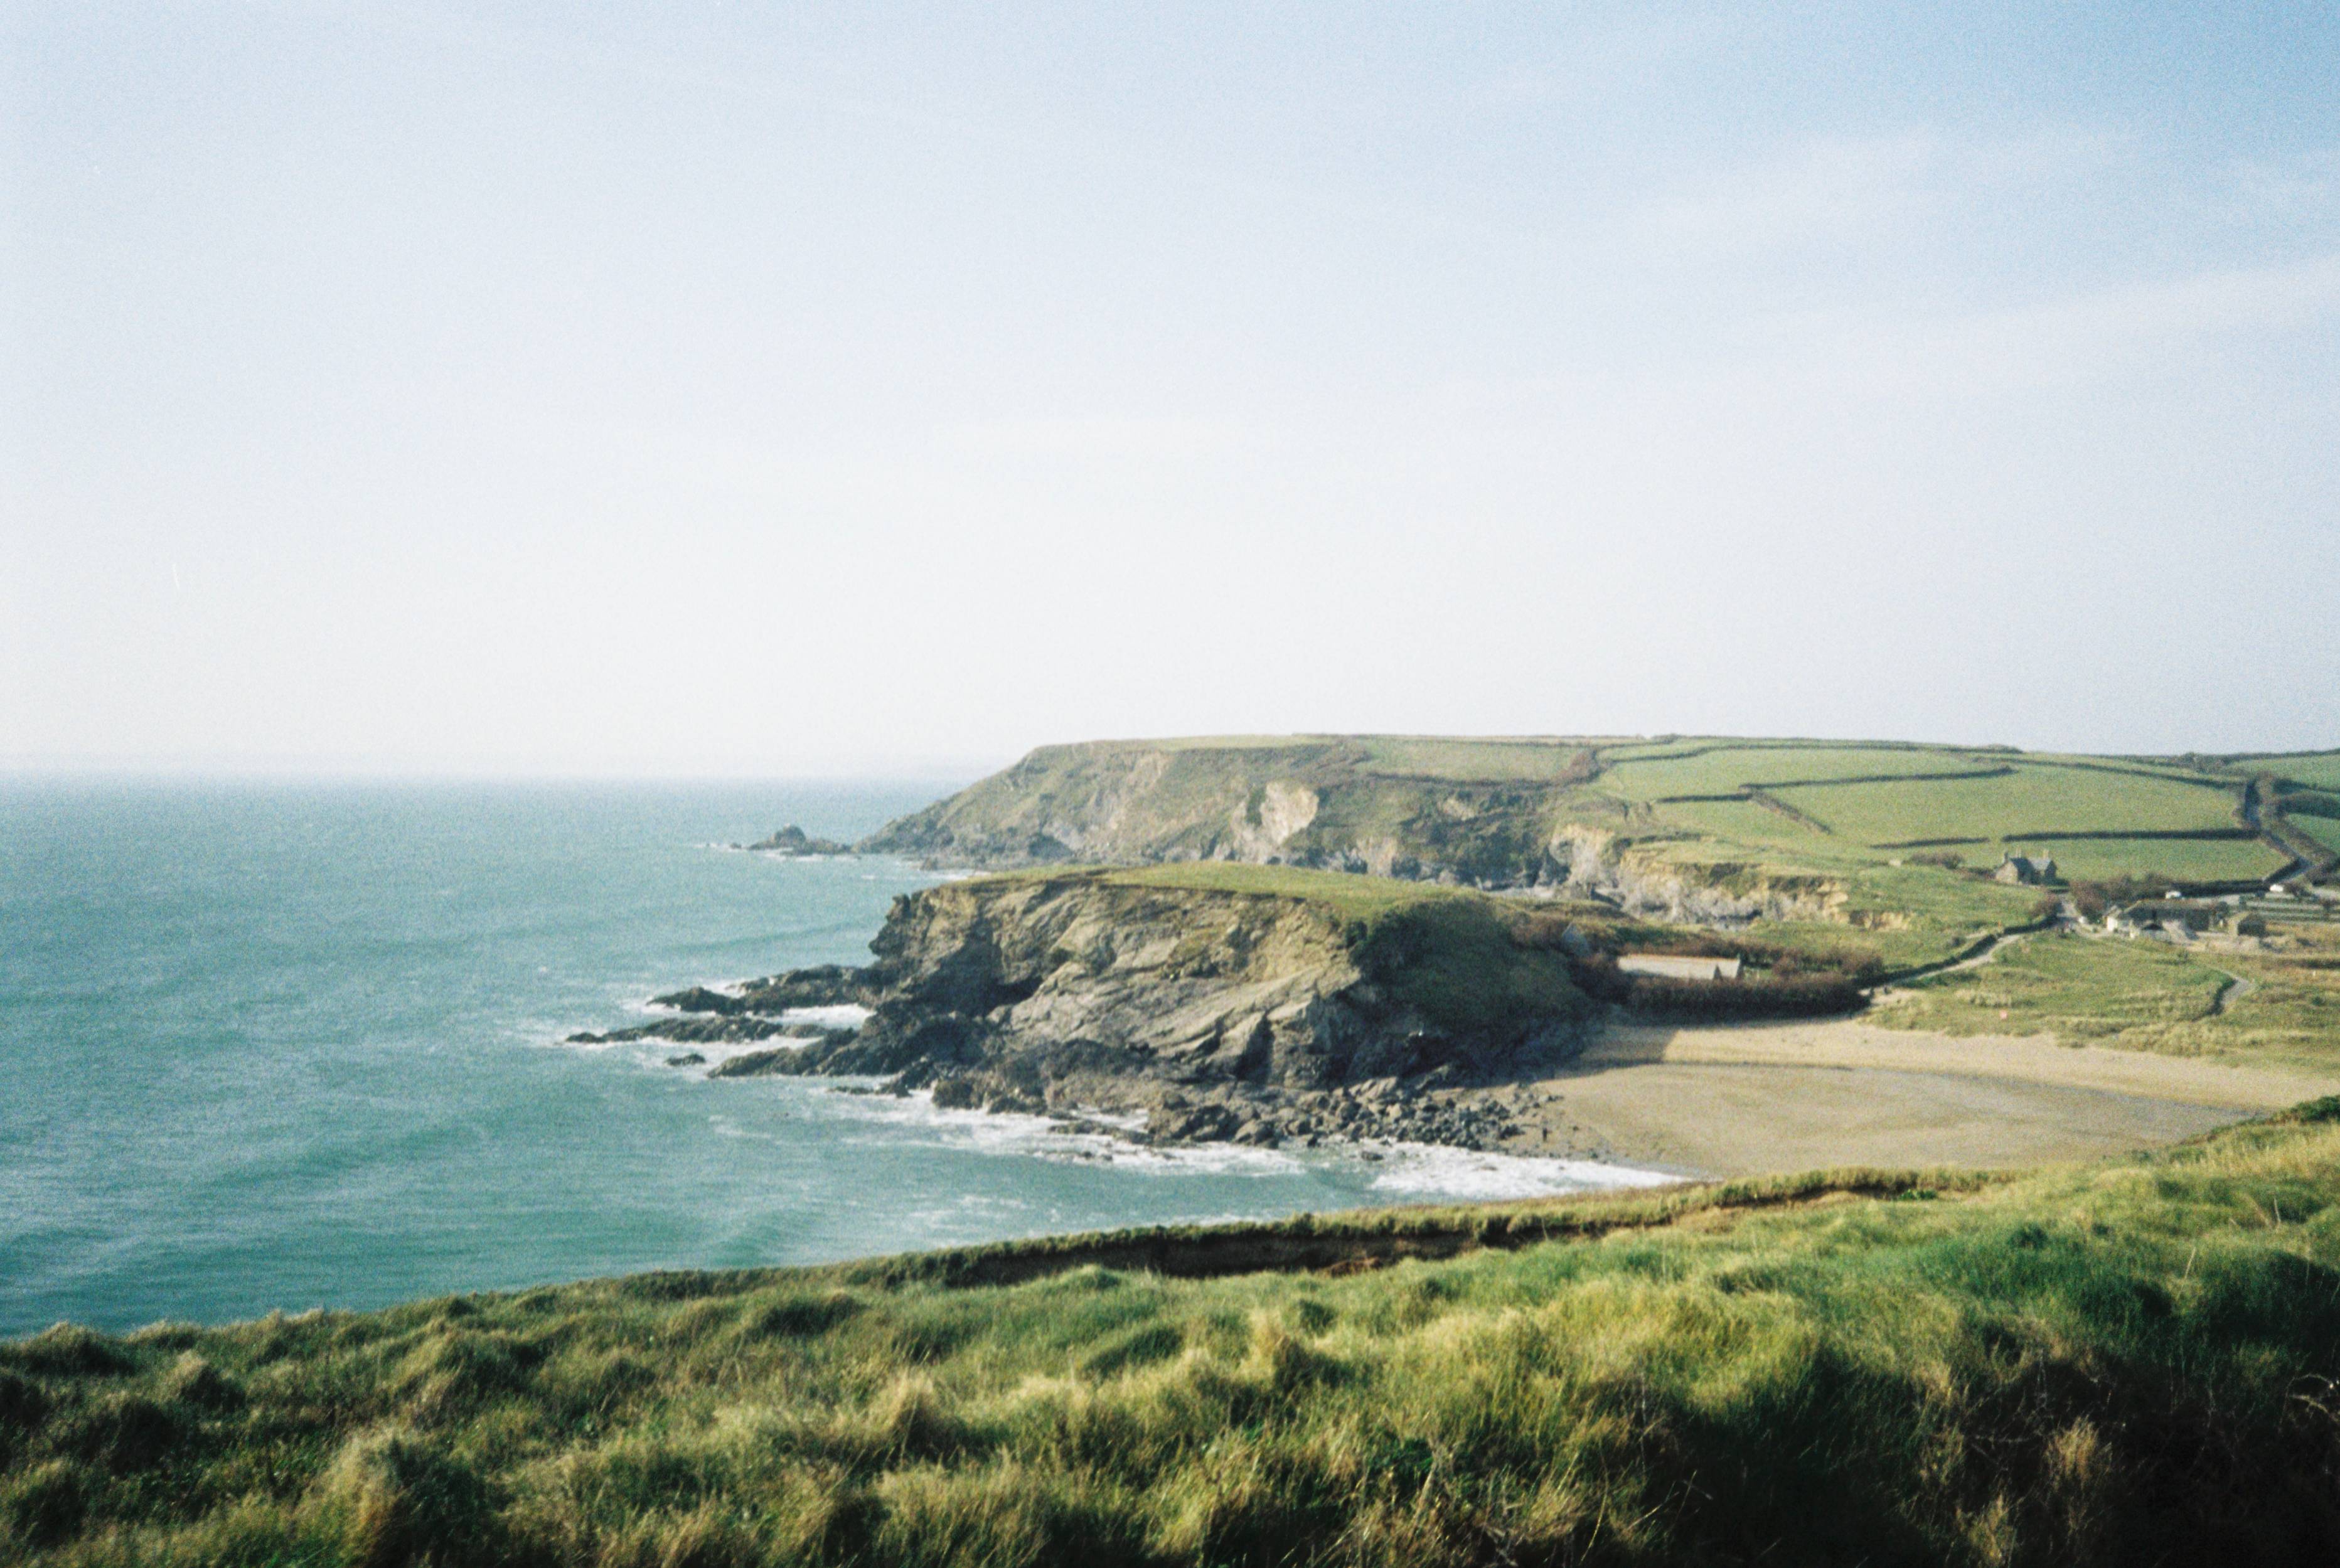 Landscape image shows the Cornish coastline; the cliffs in the background are set against the ocean